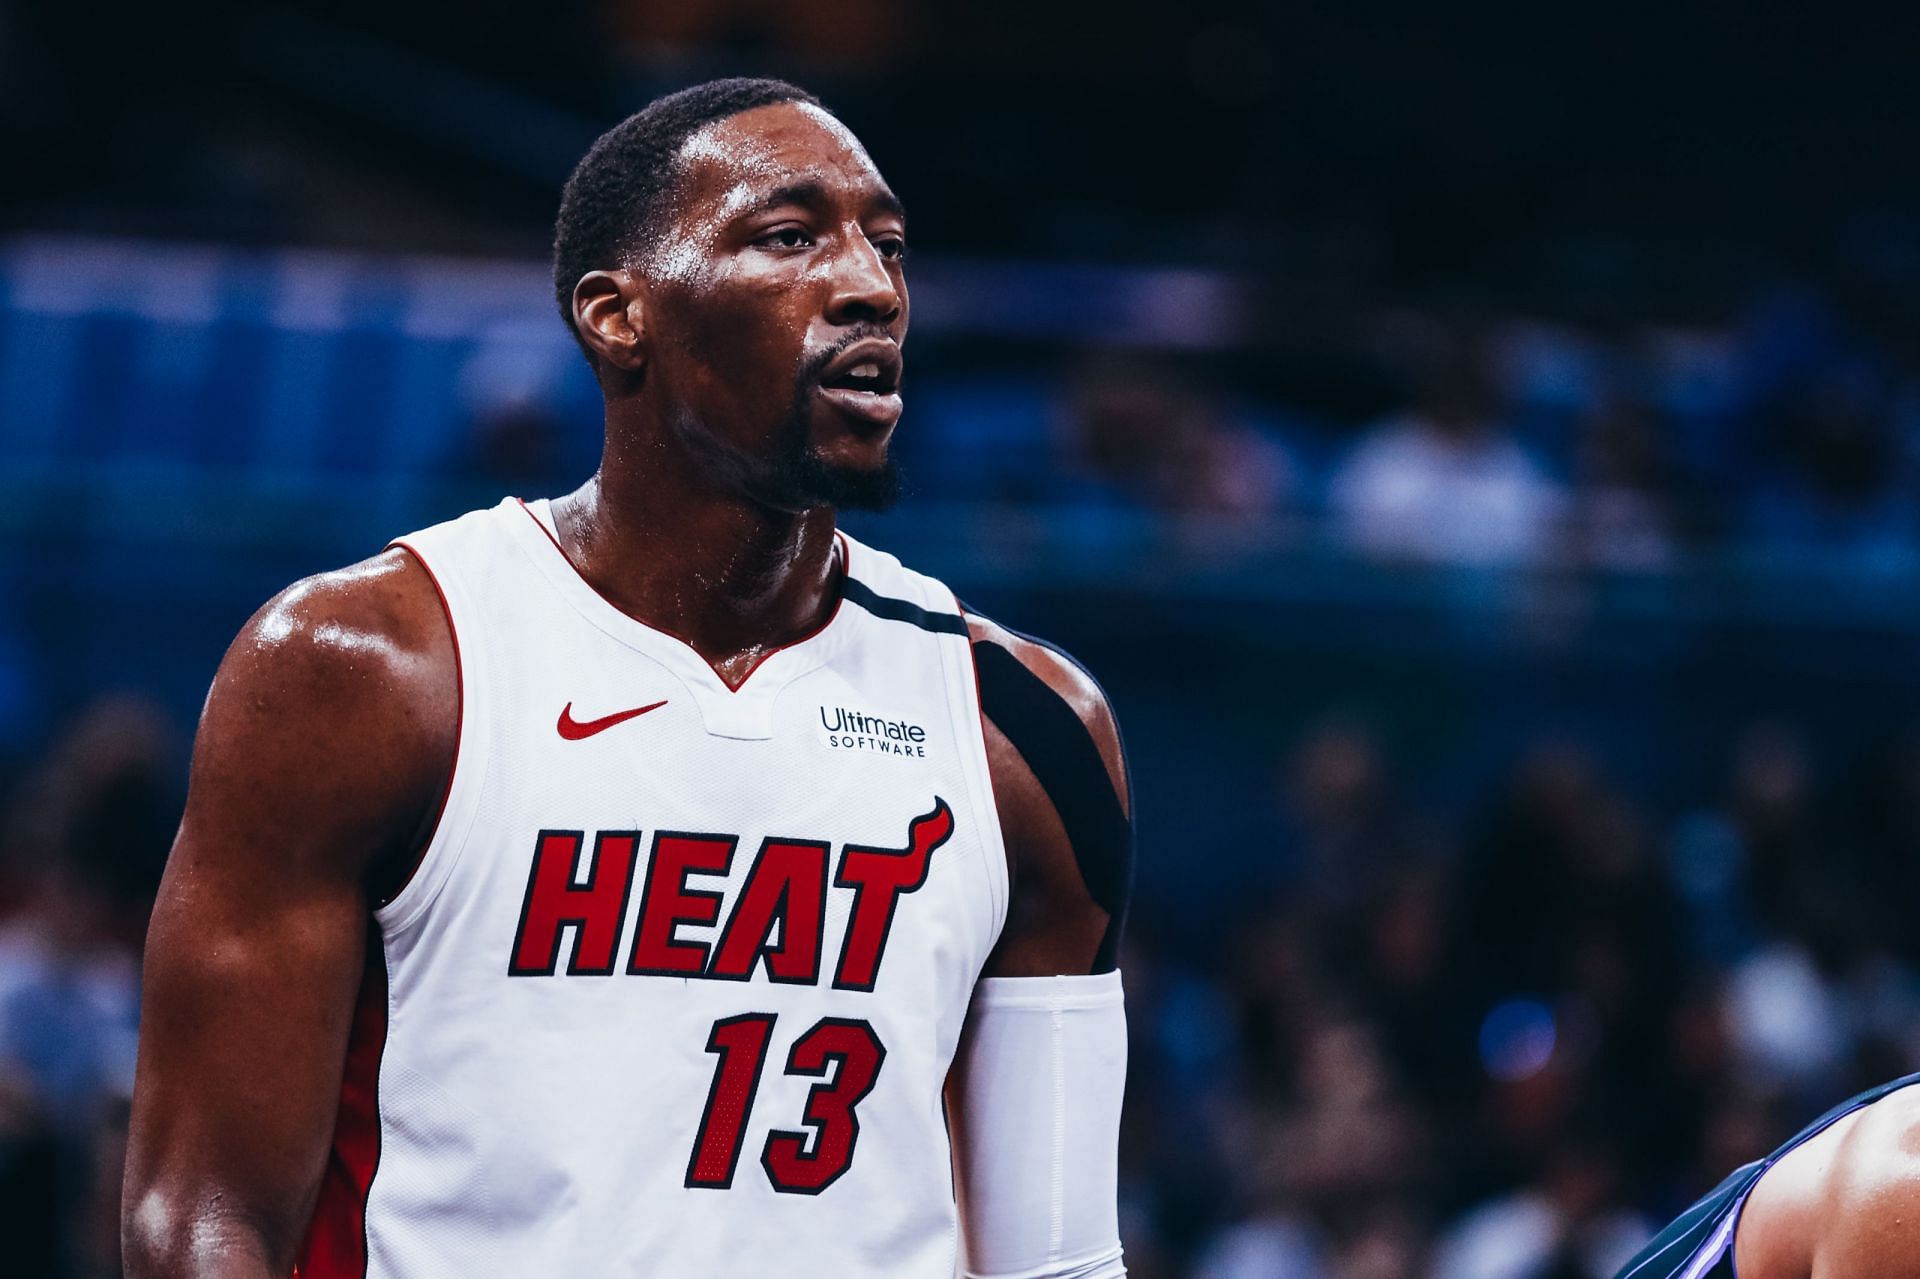 Bam Adebayo continues to be a force for the Miami Heat